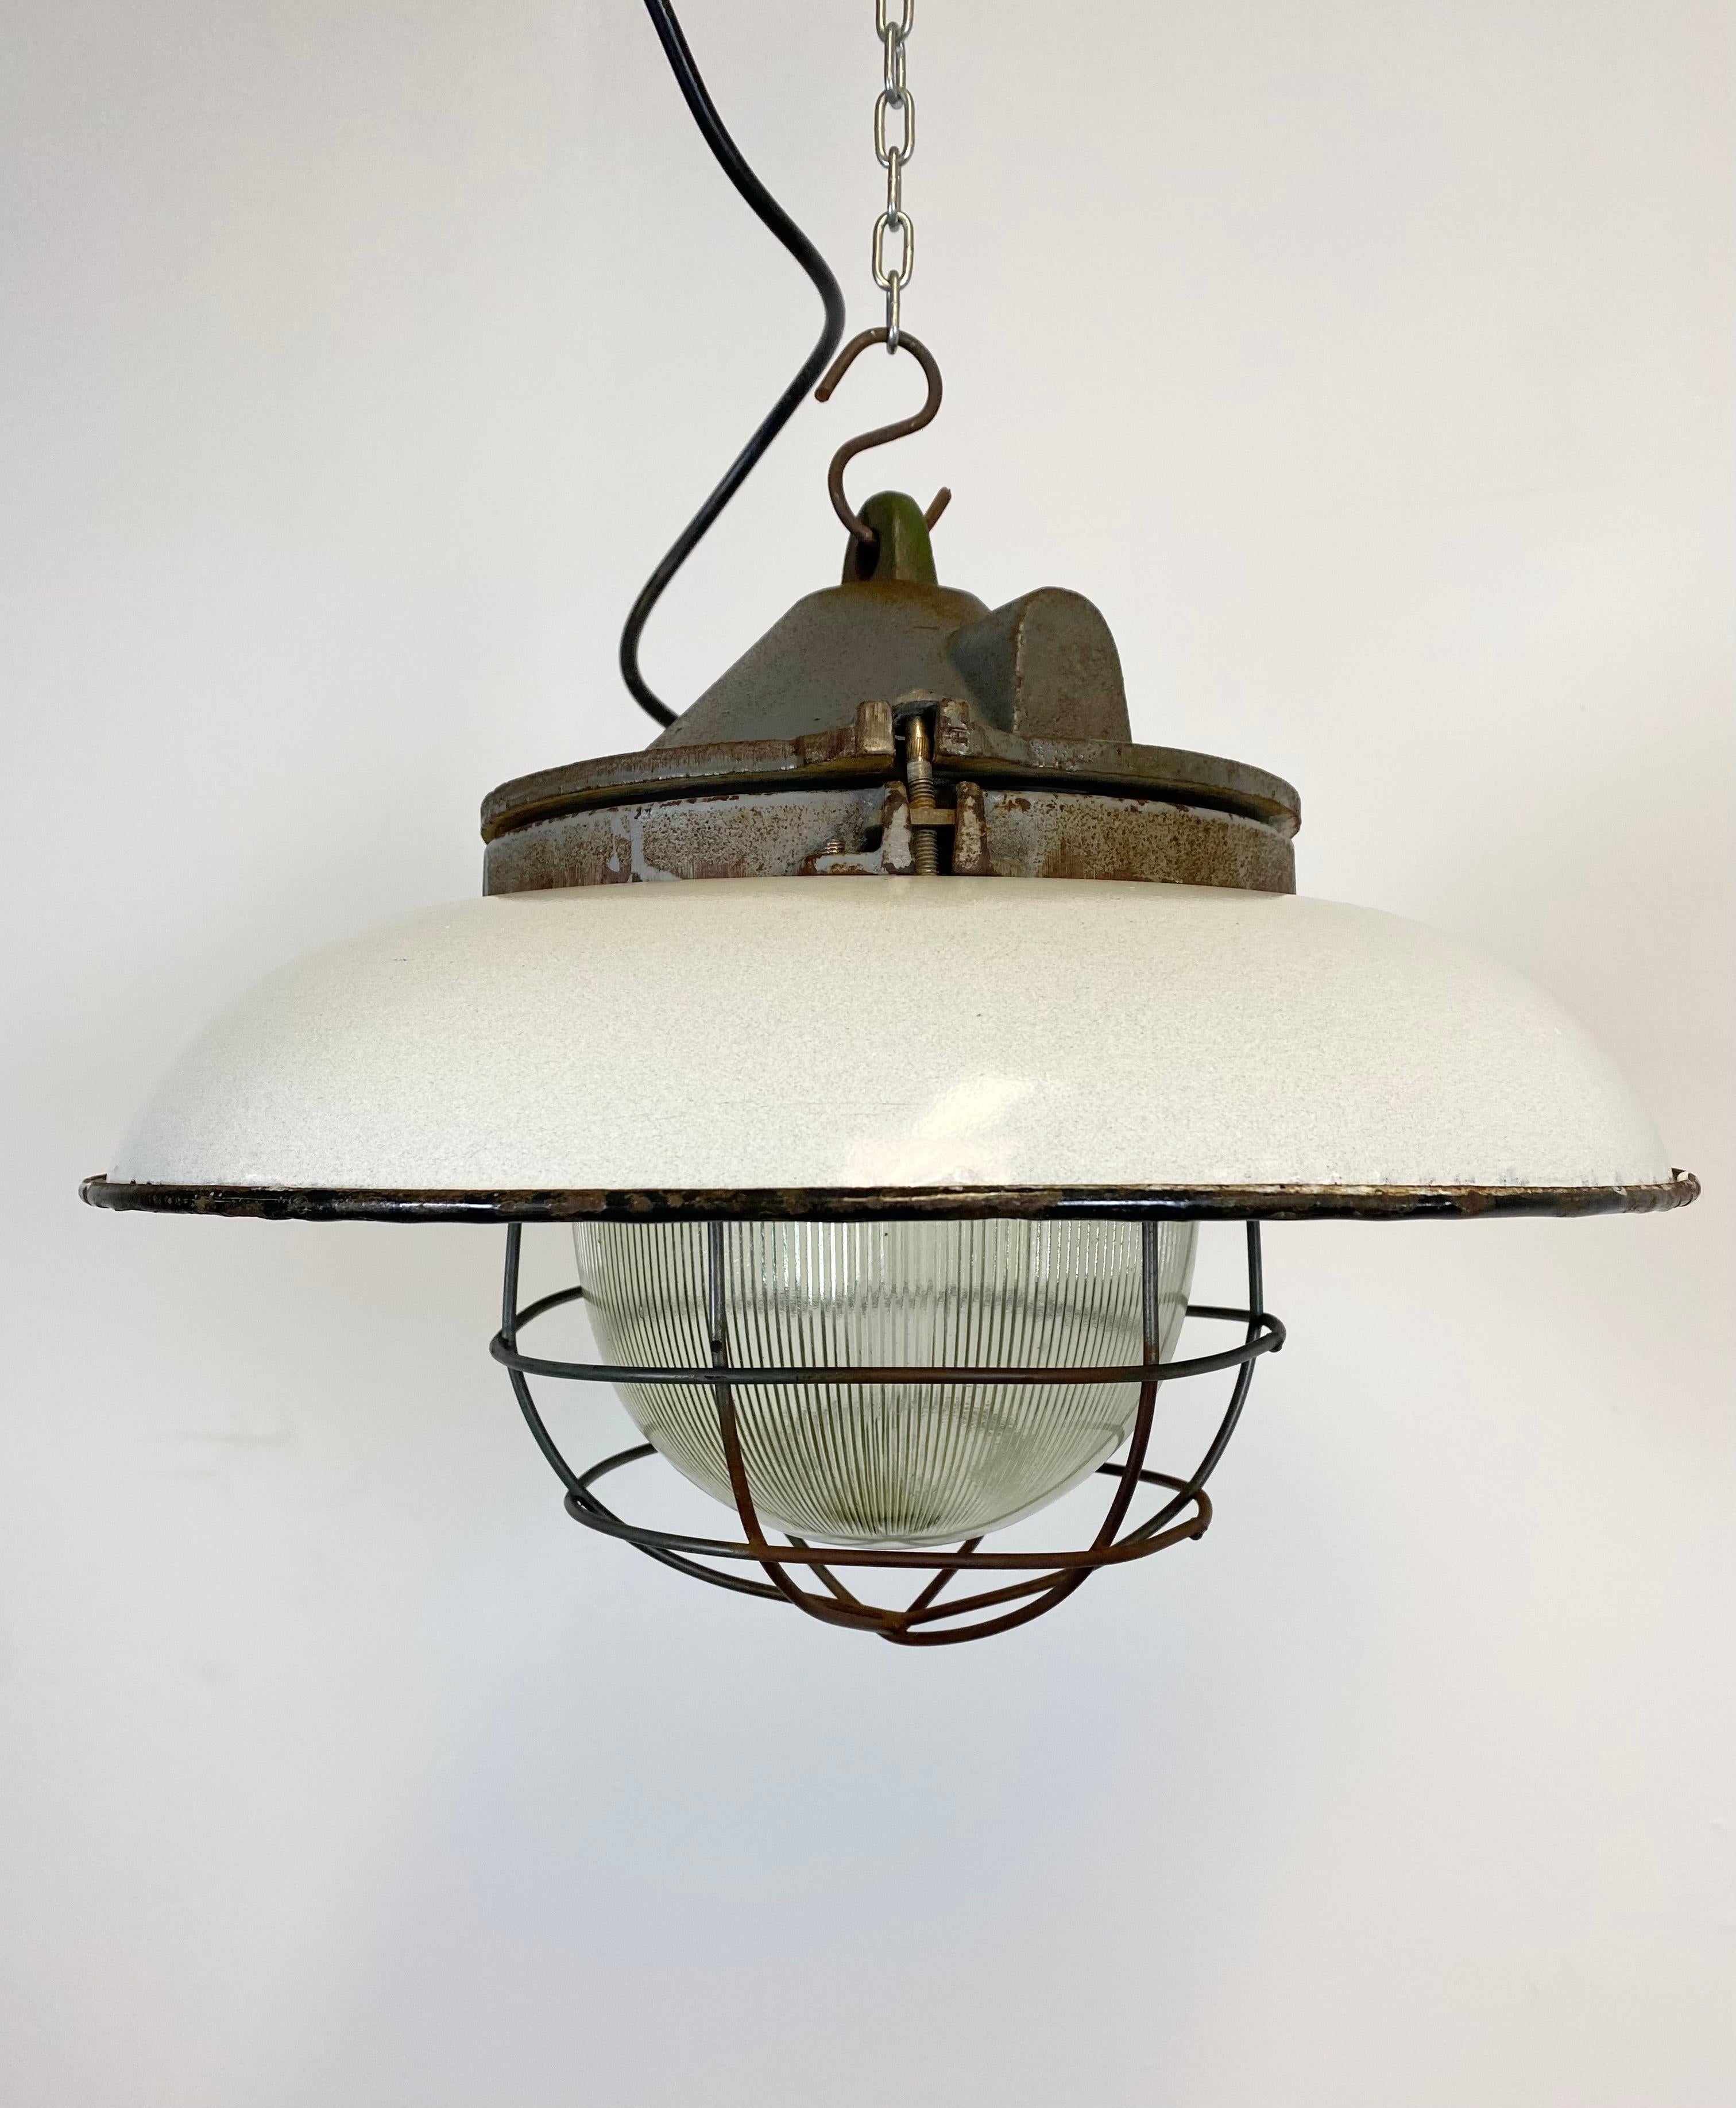 - Industrial factory pendant lamp in cast iron
- Manufactured in the 1950s
- White enamel shade and iron grid
- Holophane glass
- Weight: 6.0 kg.